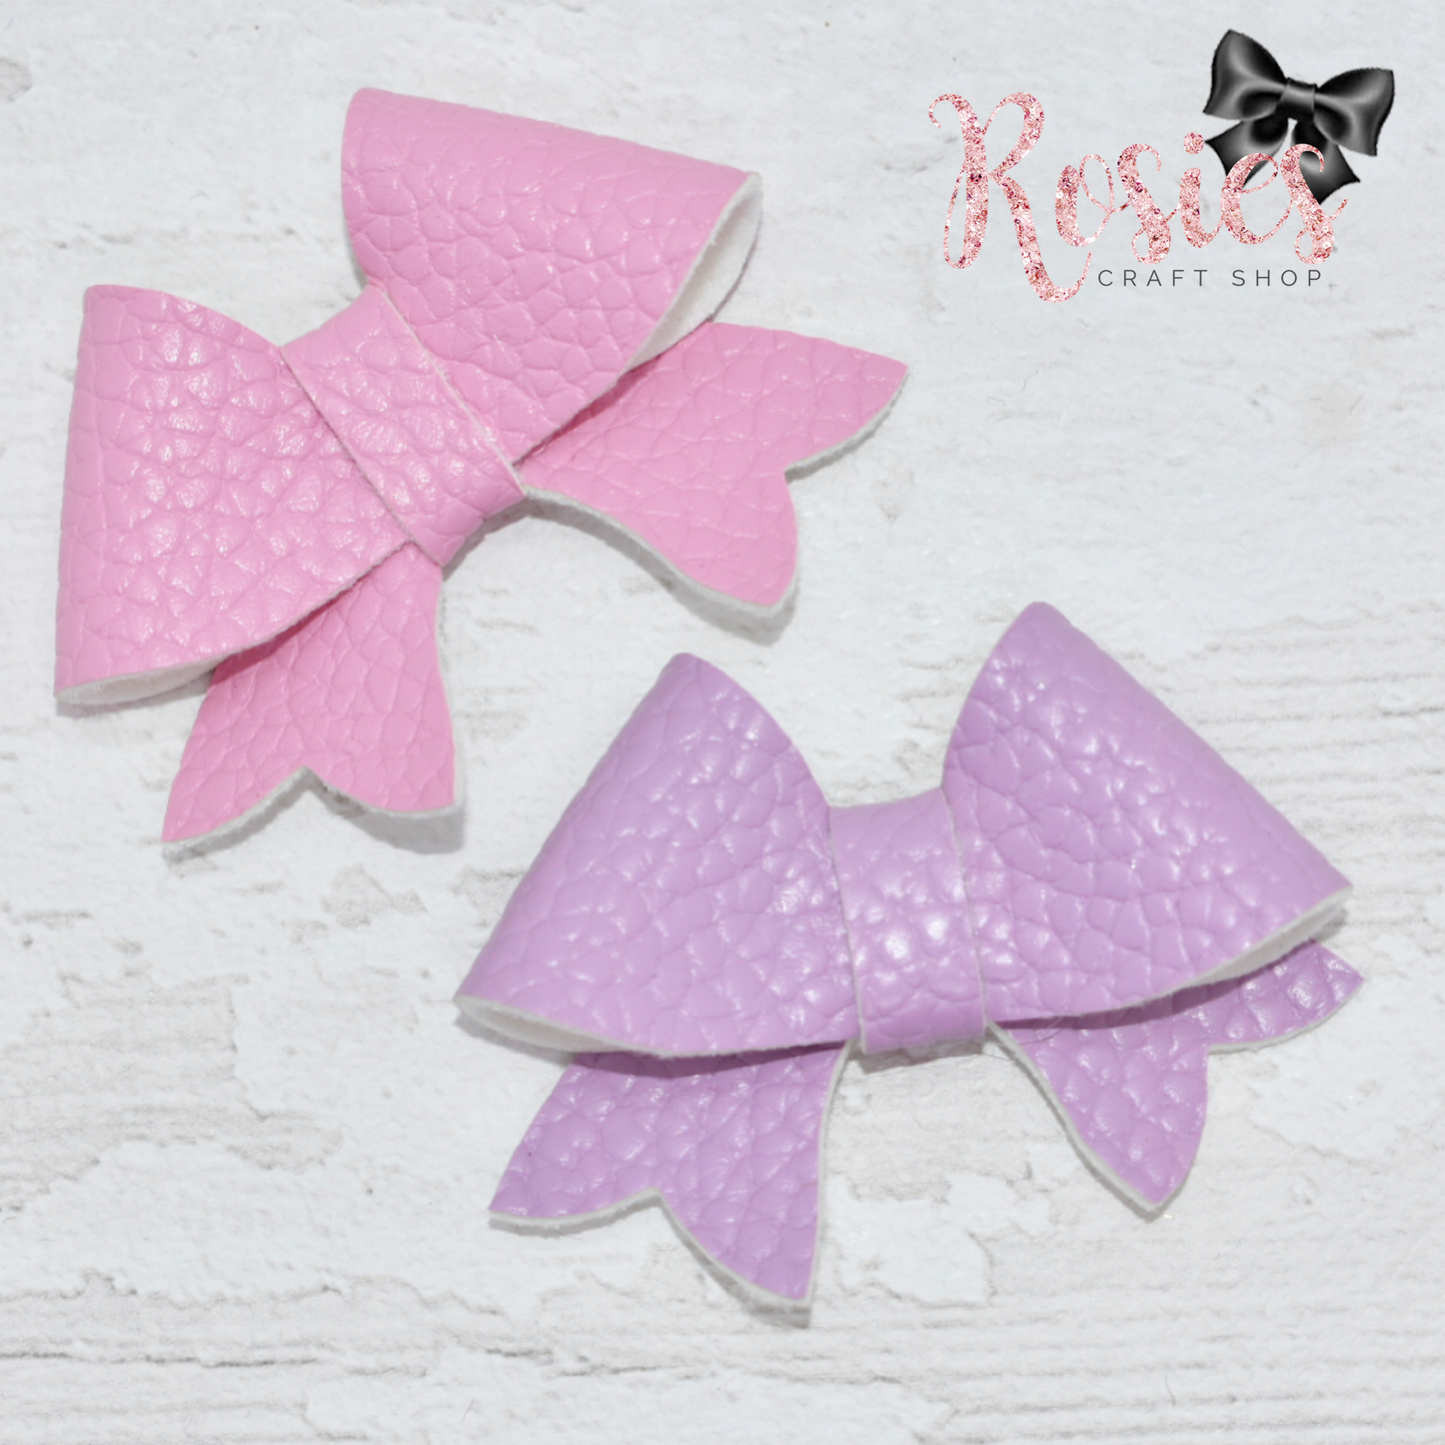 2.25" Sweetheart Bow Plastic Template 🎀